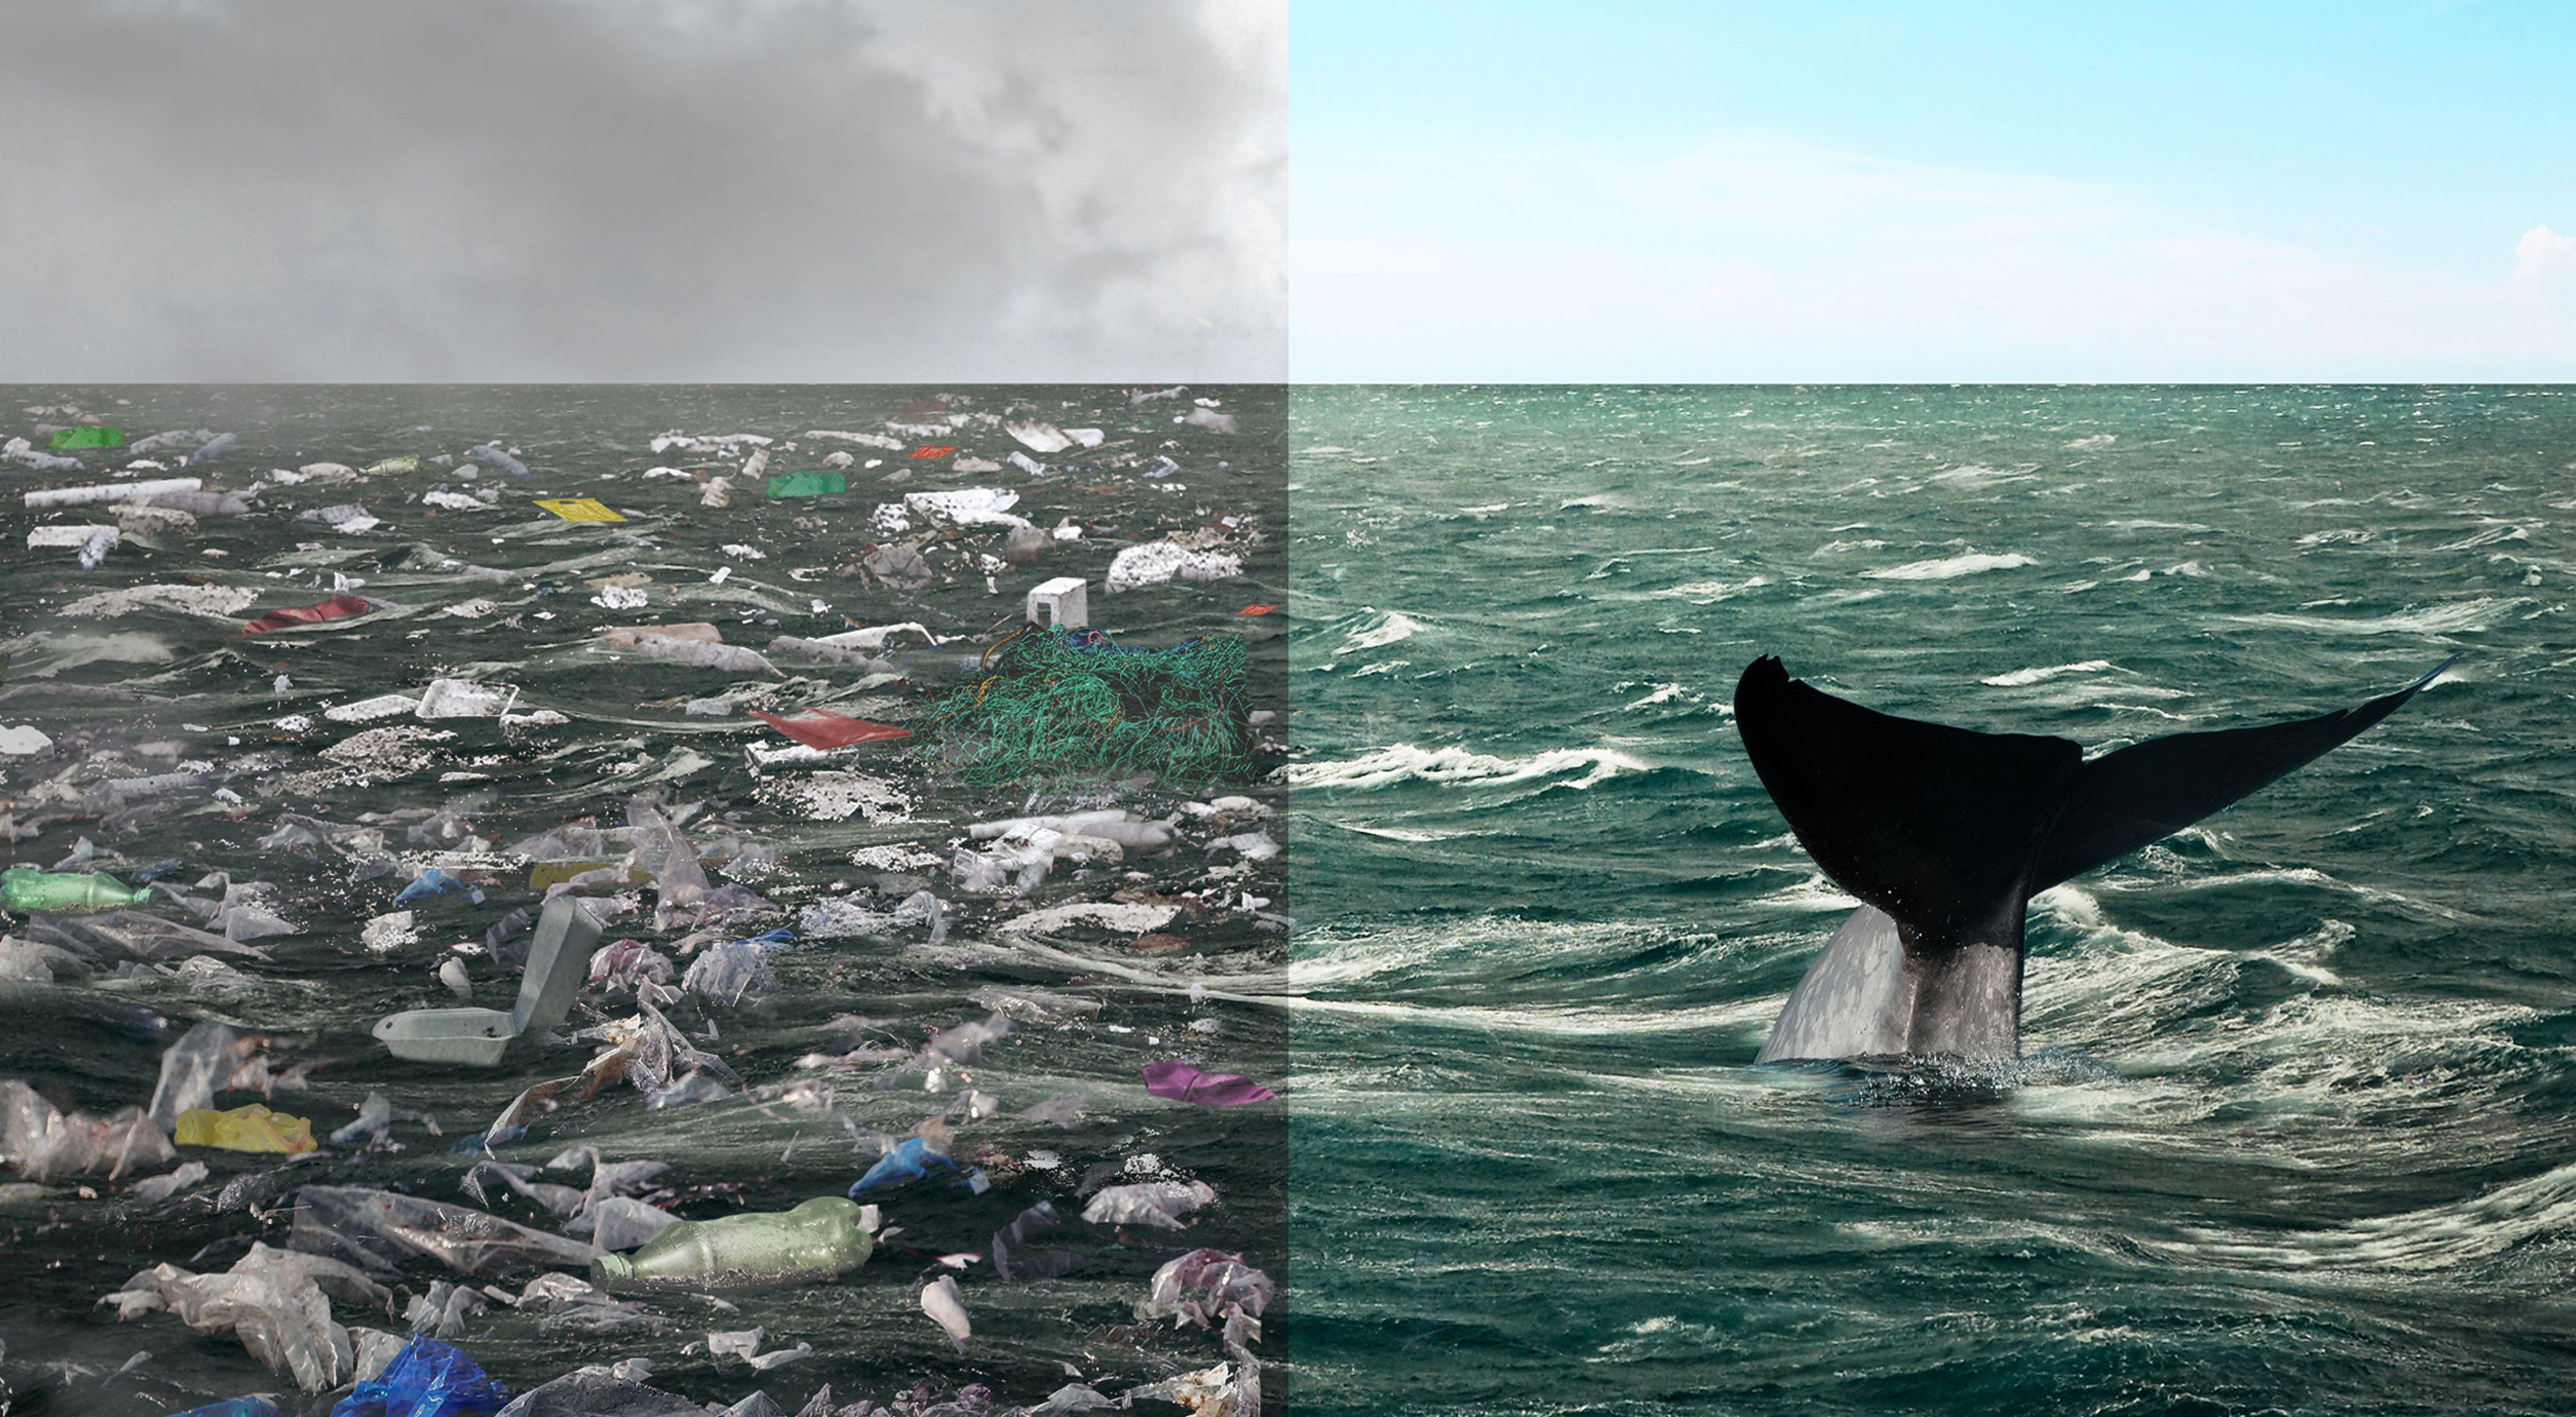 Split image of a whale in clean water vs an ocean full of trash and plastic.